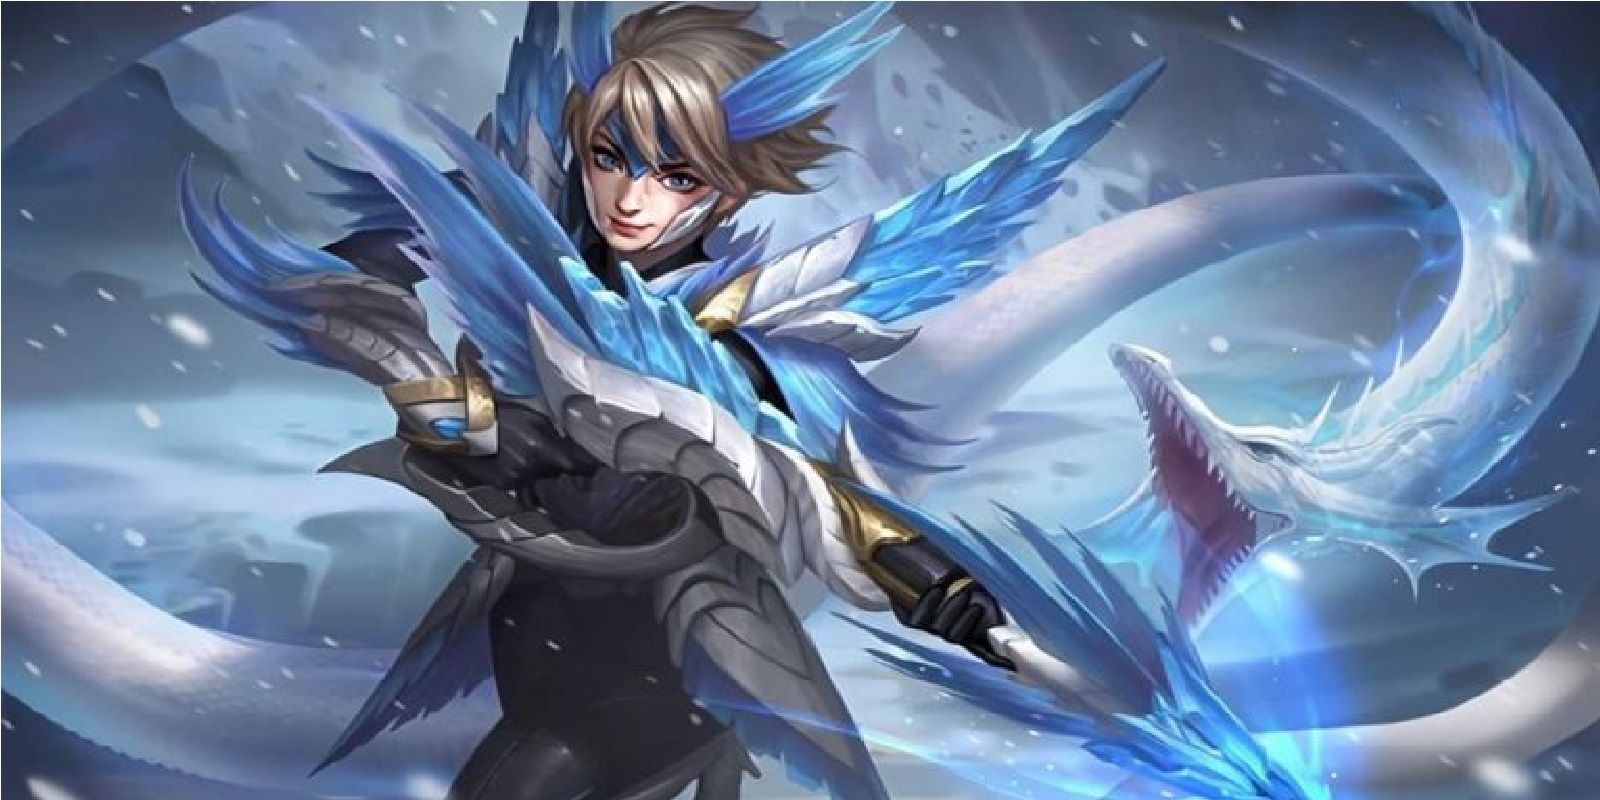 Buff & Nerf Hero Mobile Legends Patch Note 1.5.32 (24 November 2020